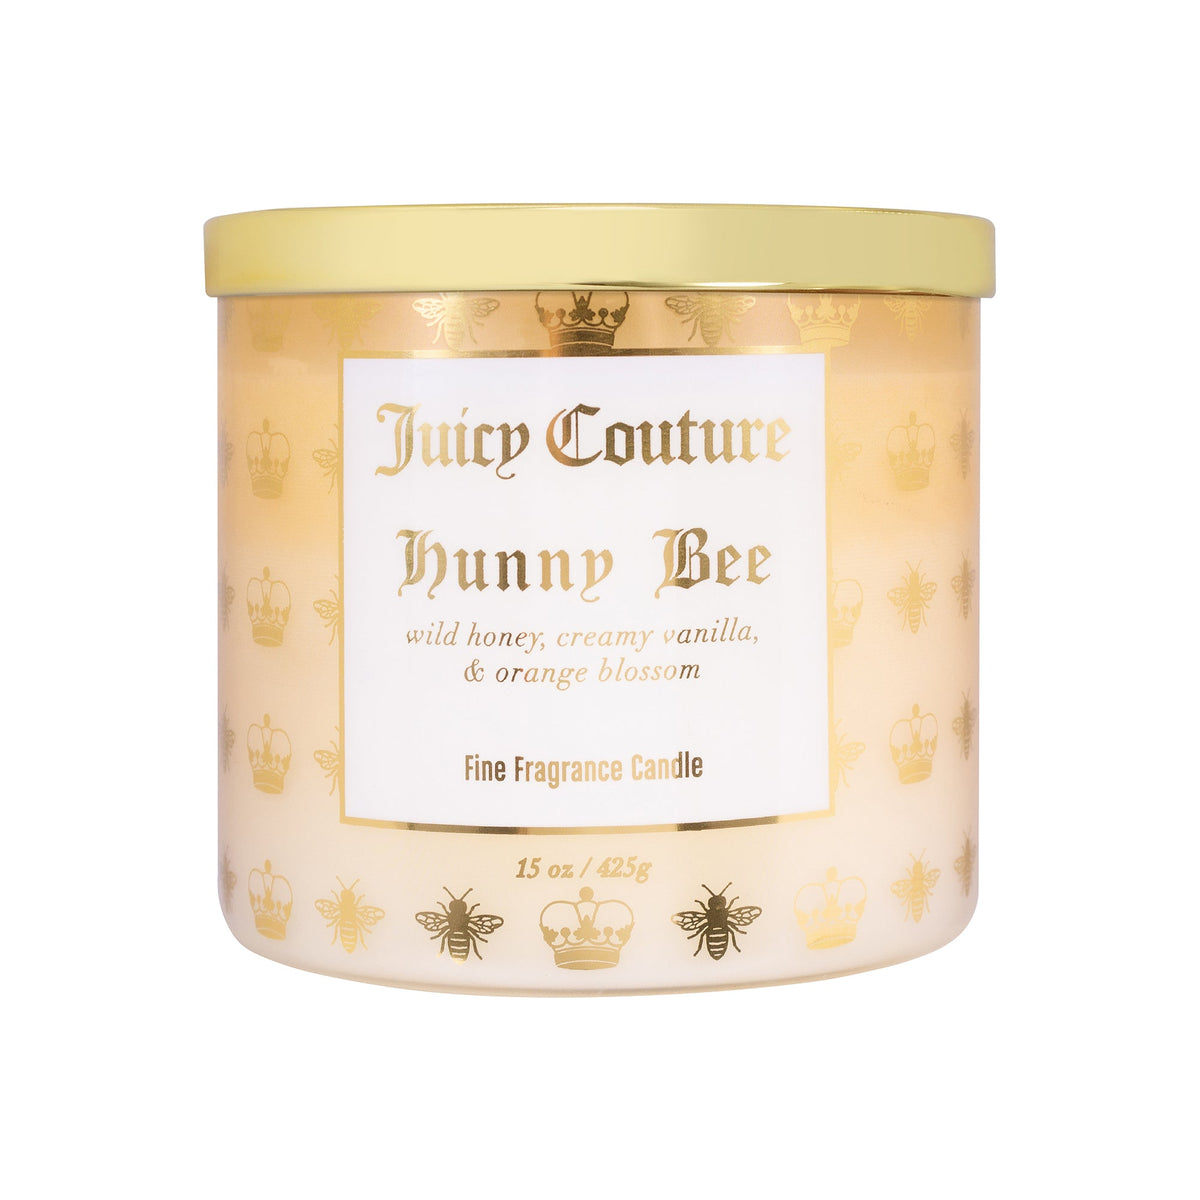 Juicy Couture Hunny Bee Candle